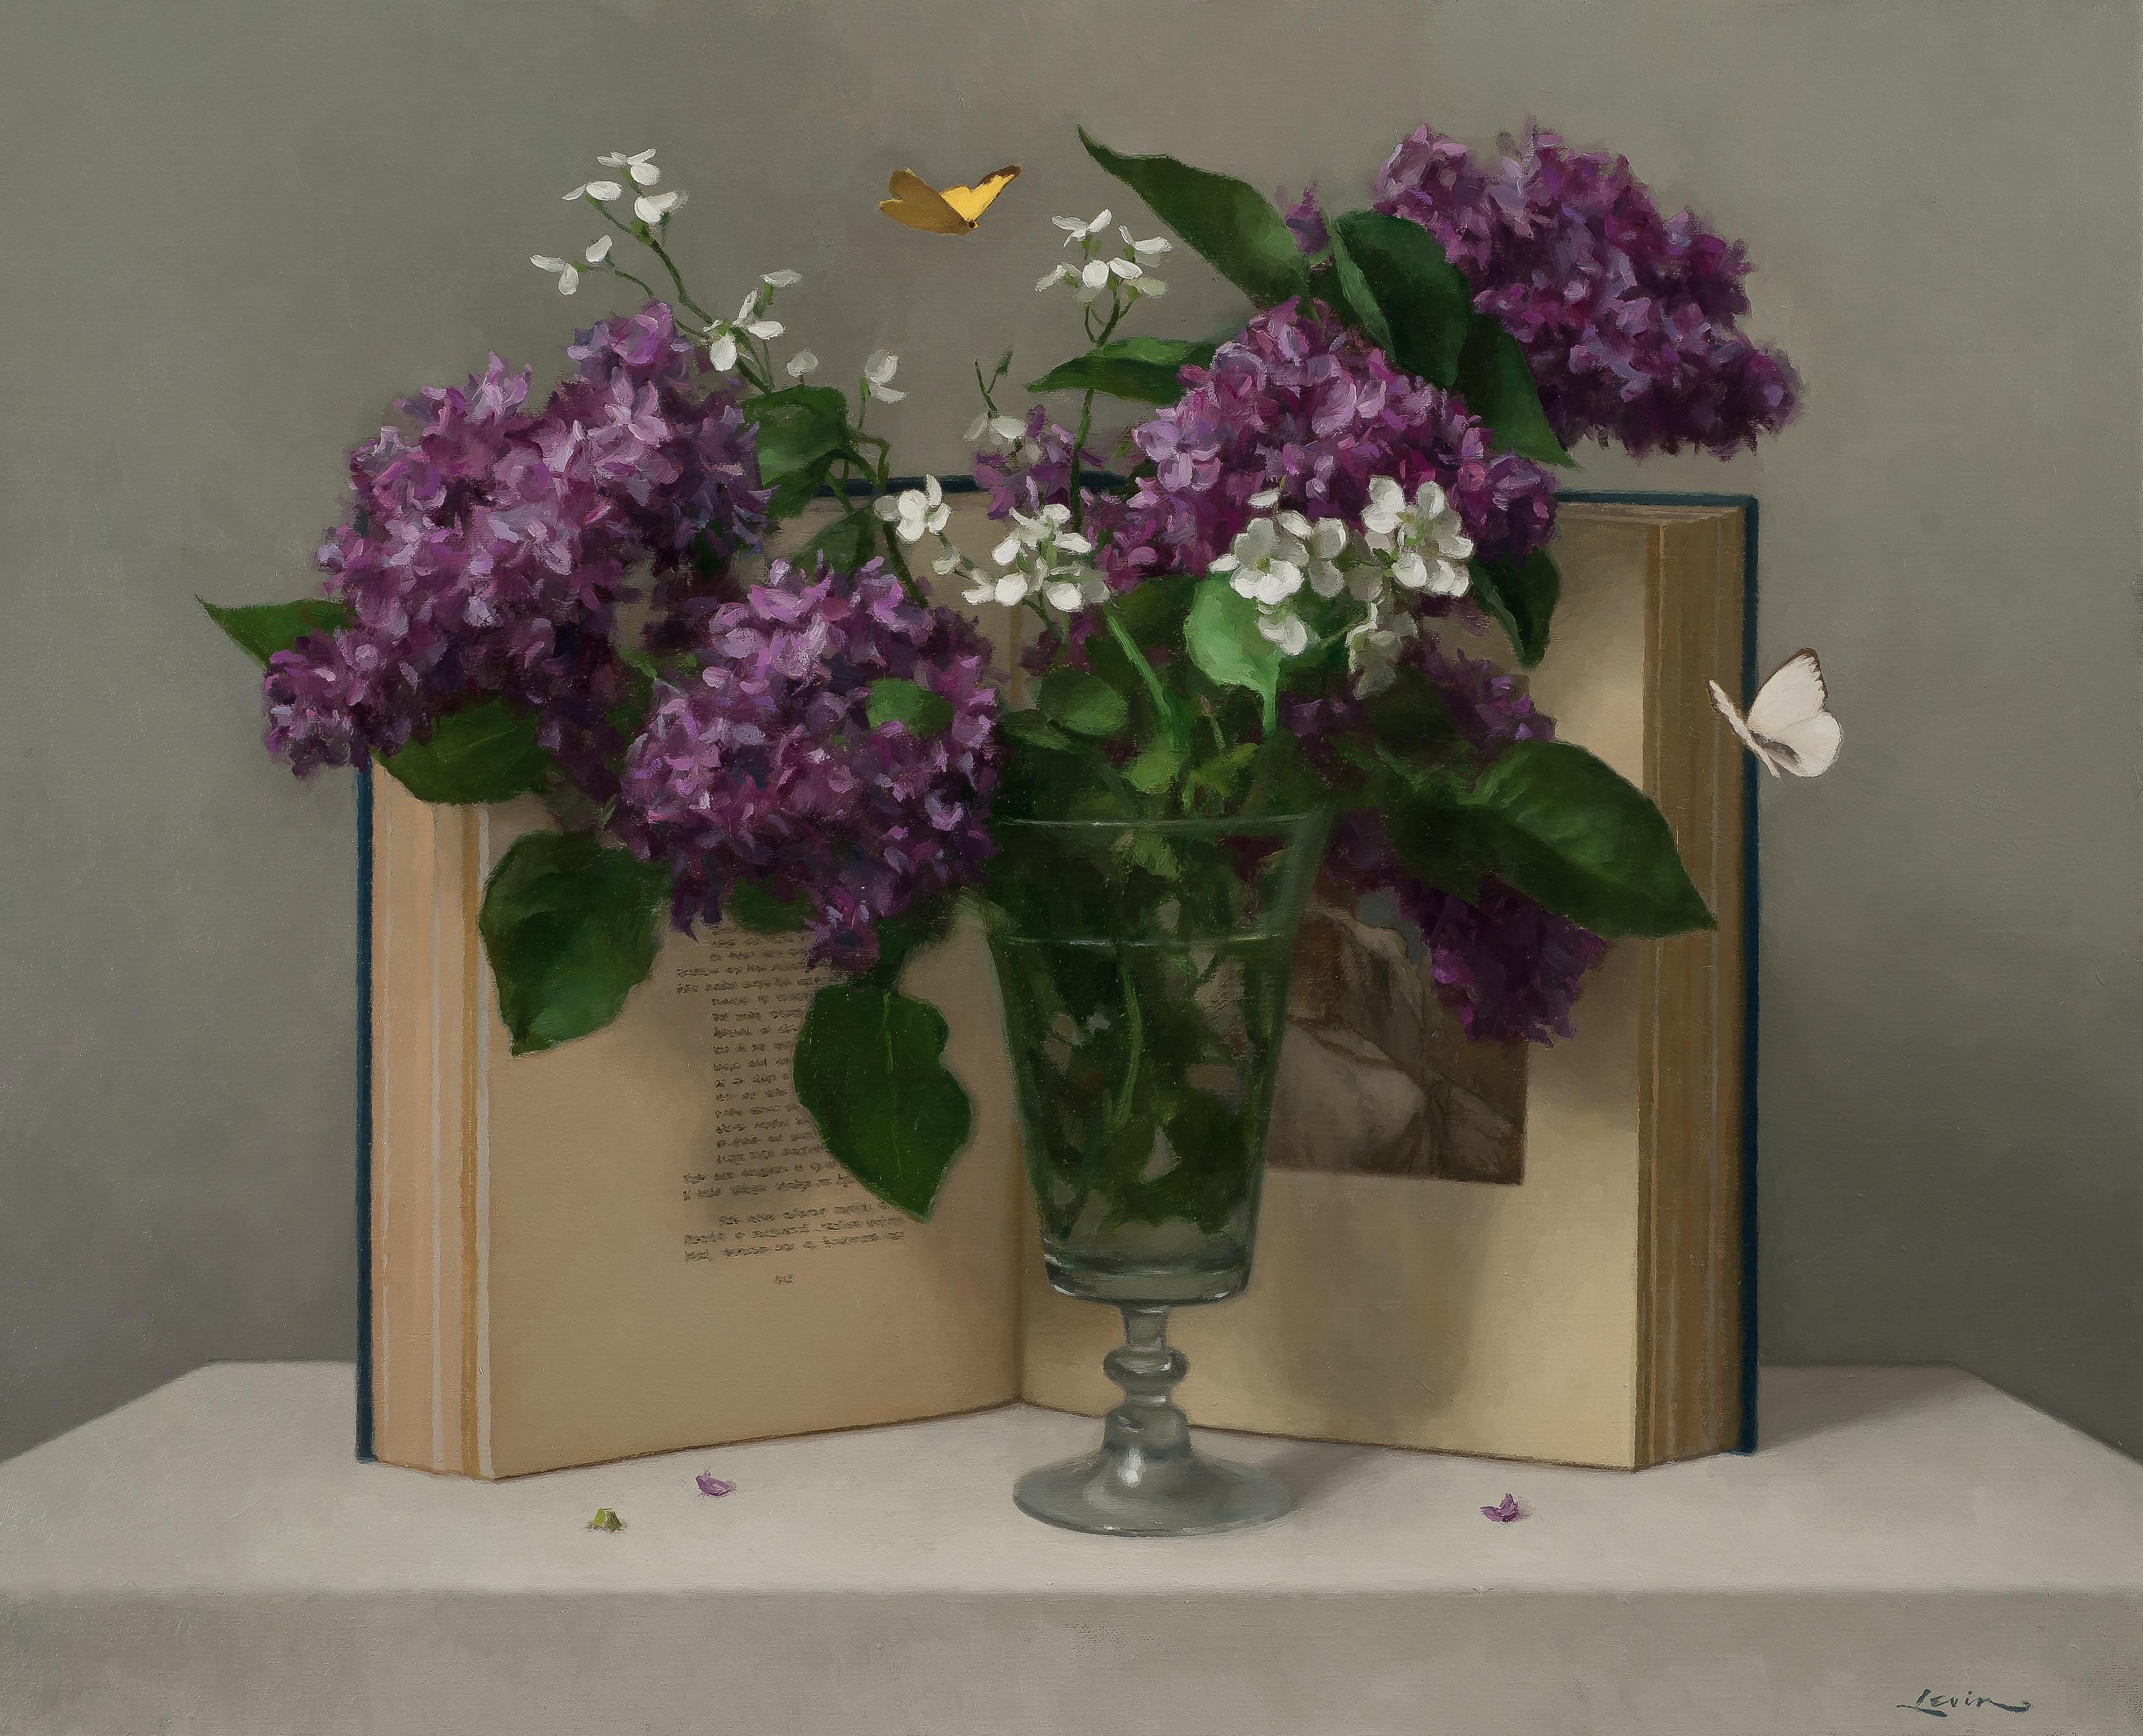 Steven J. Levin Interior Painting - "Lilacs and Book" - contemporary realist painting, purple flora and literature